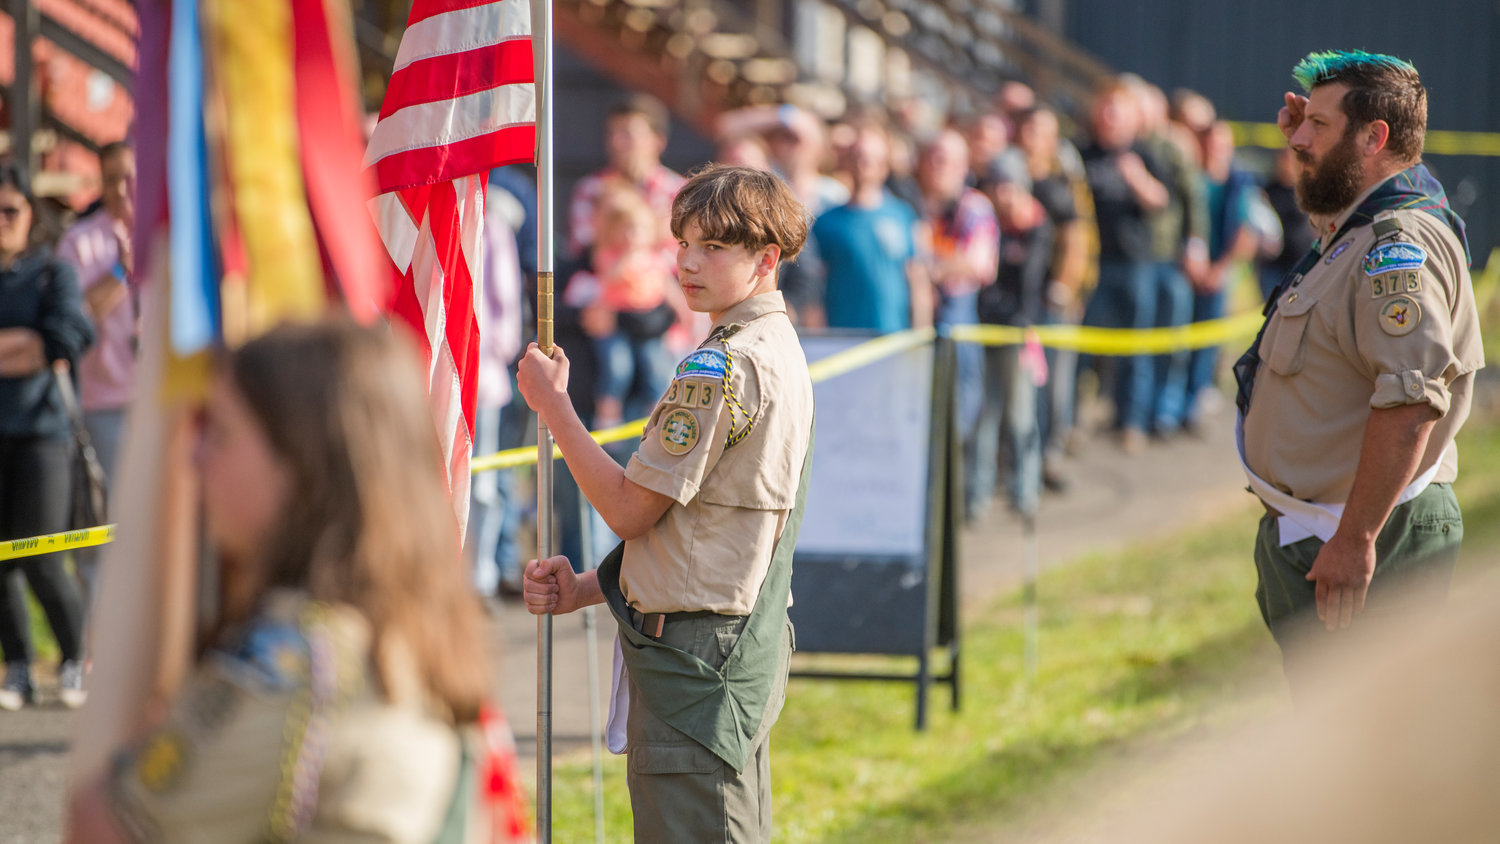 Scouts from Troop 373 in Chehalis present colors during Summerfest in Centralia at the Southwest Washington Fairgrounds Sunday evening.